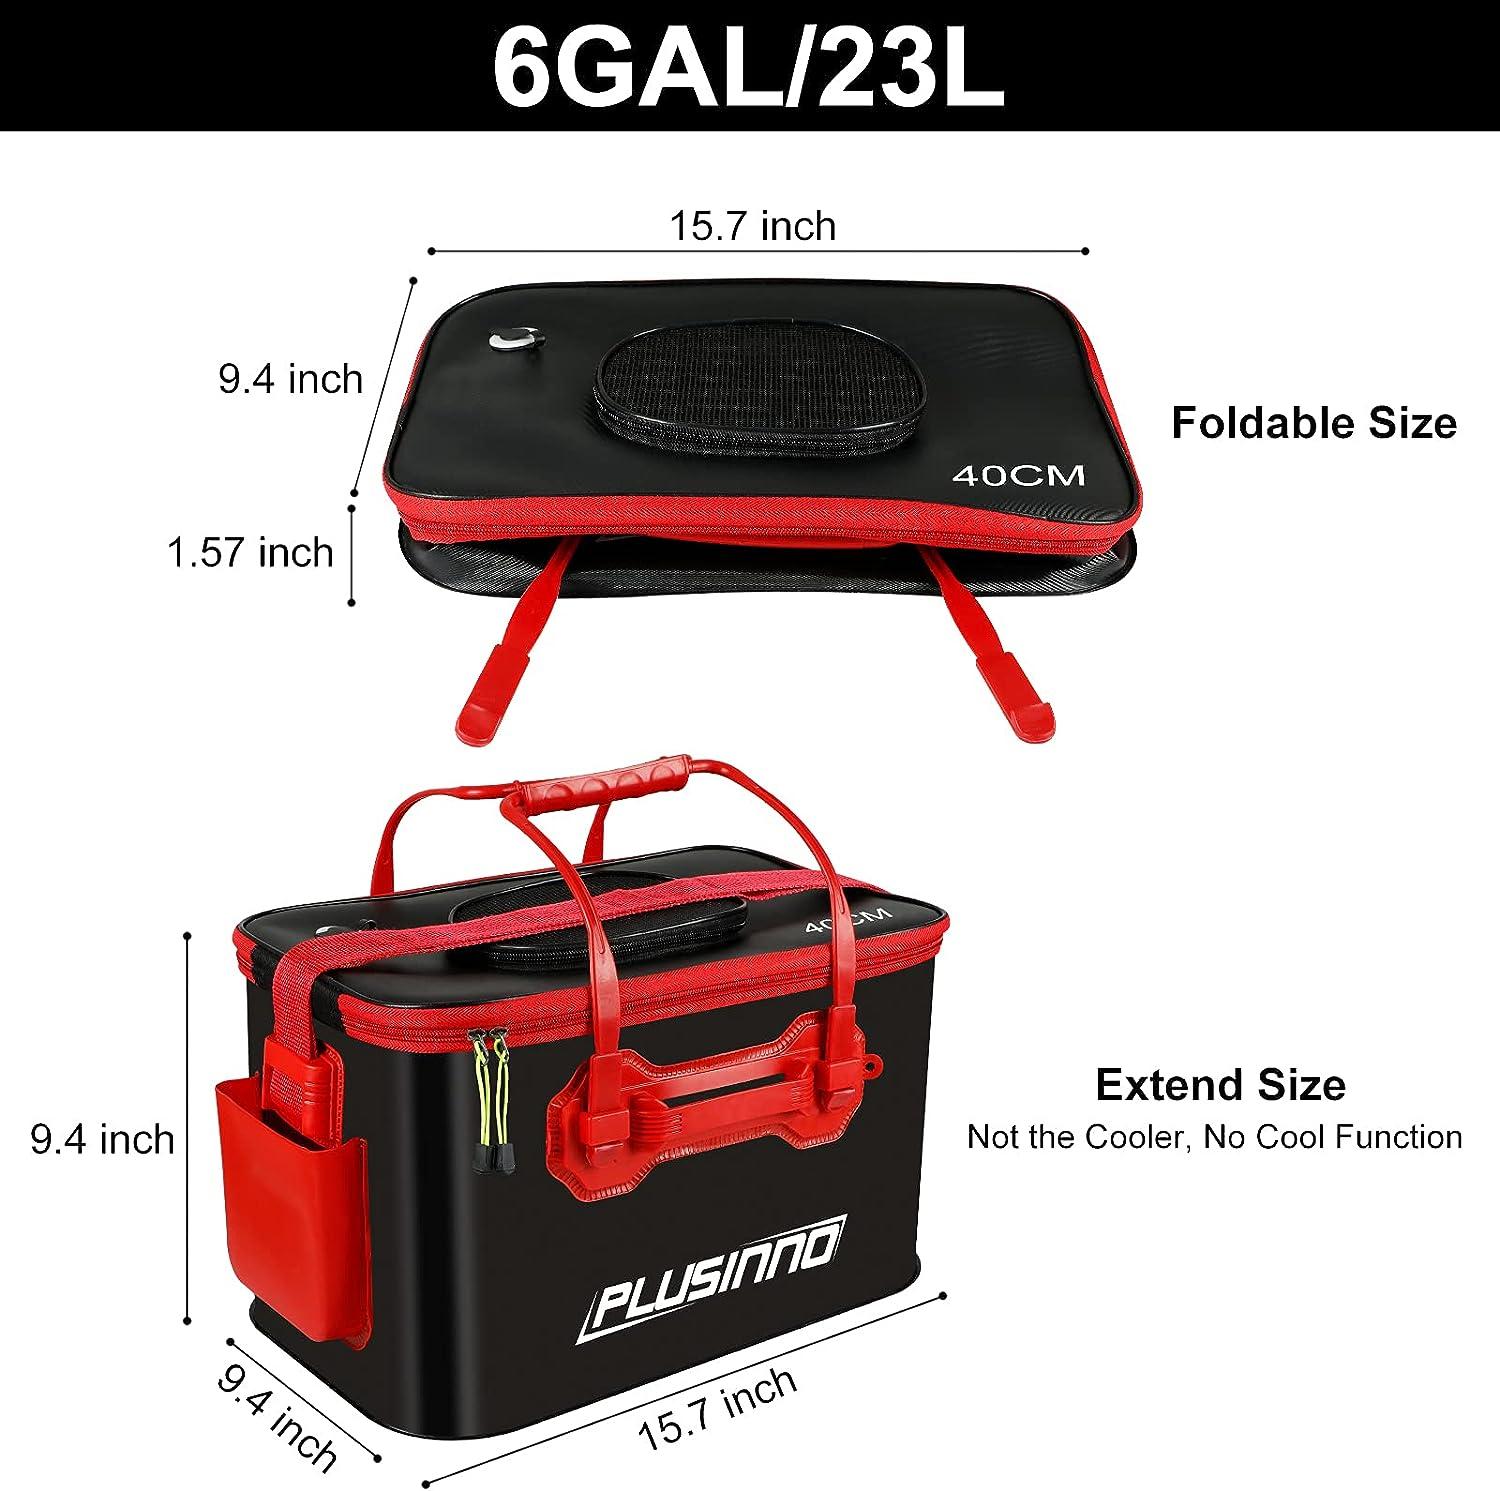 What is Portable Fishing Bucket Live Fishing Tackle Bag Foldable